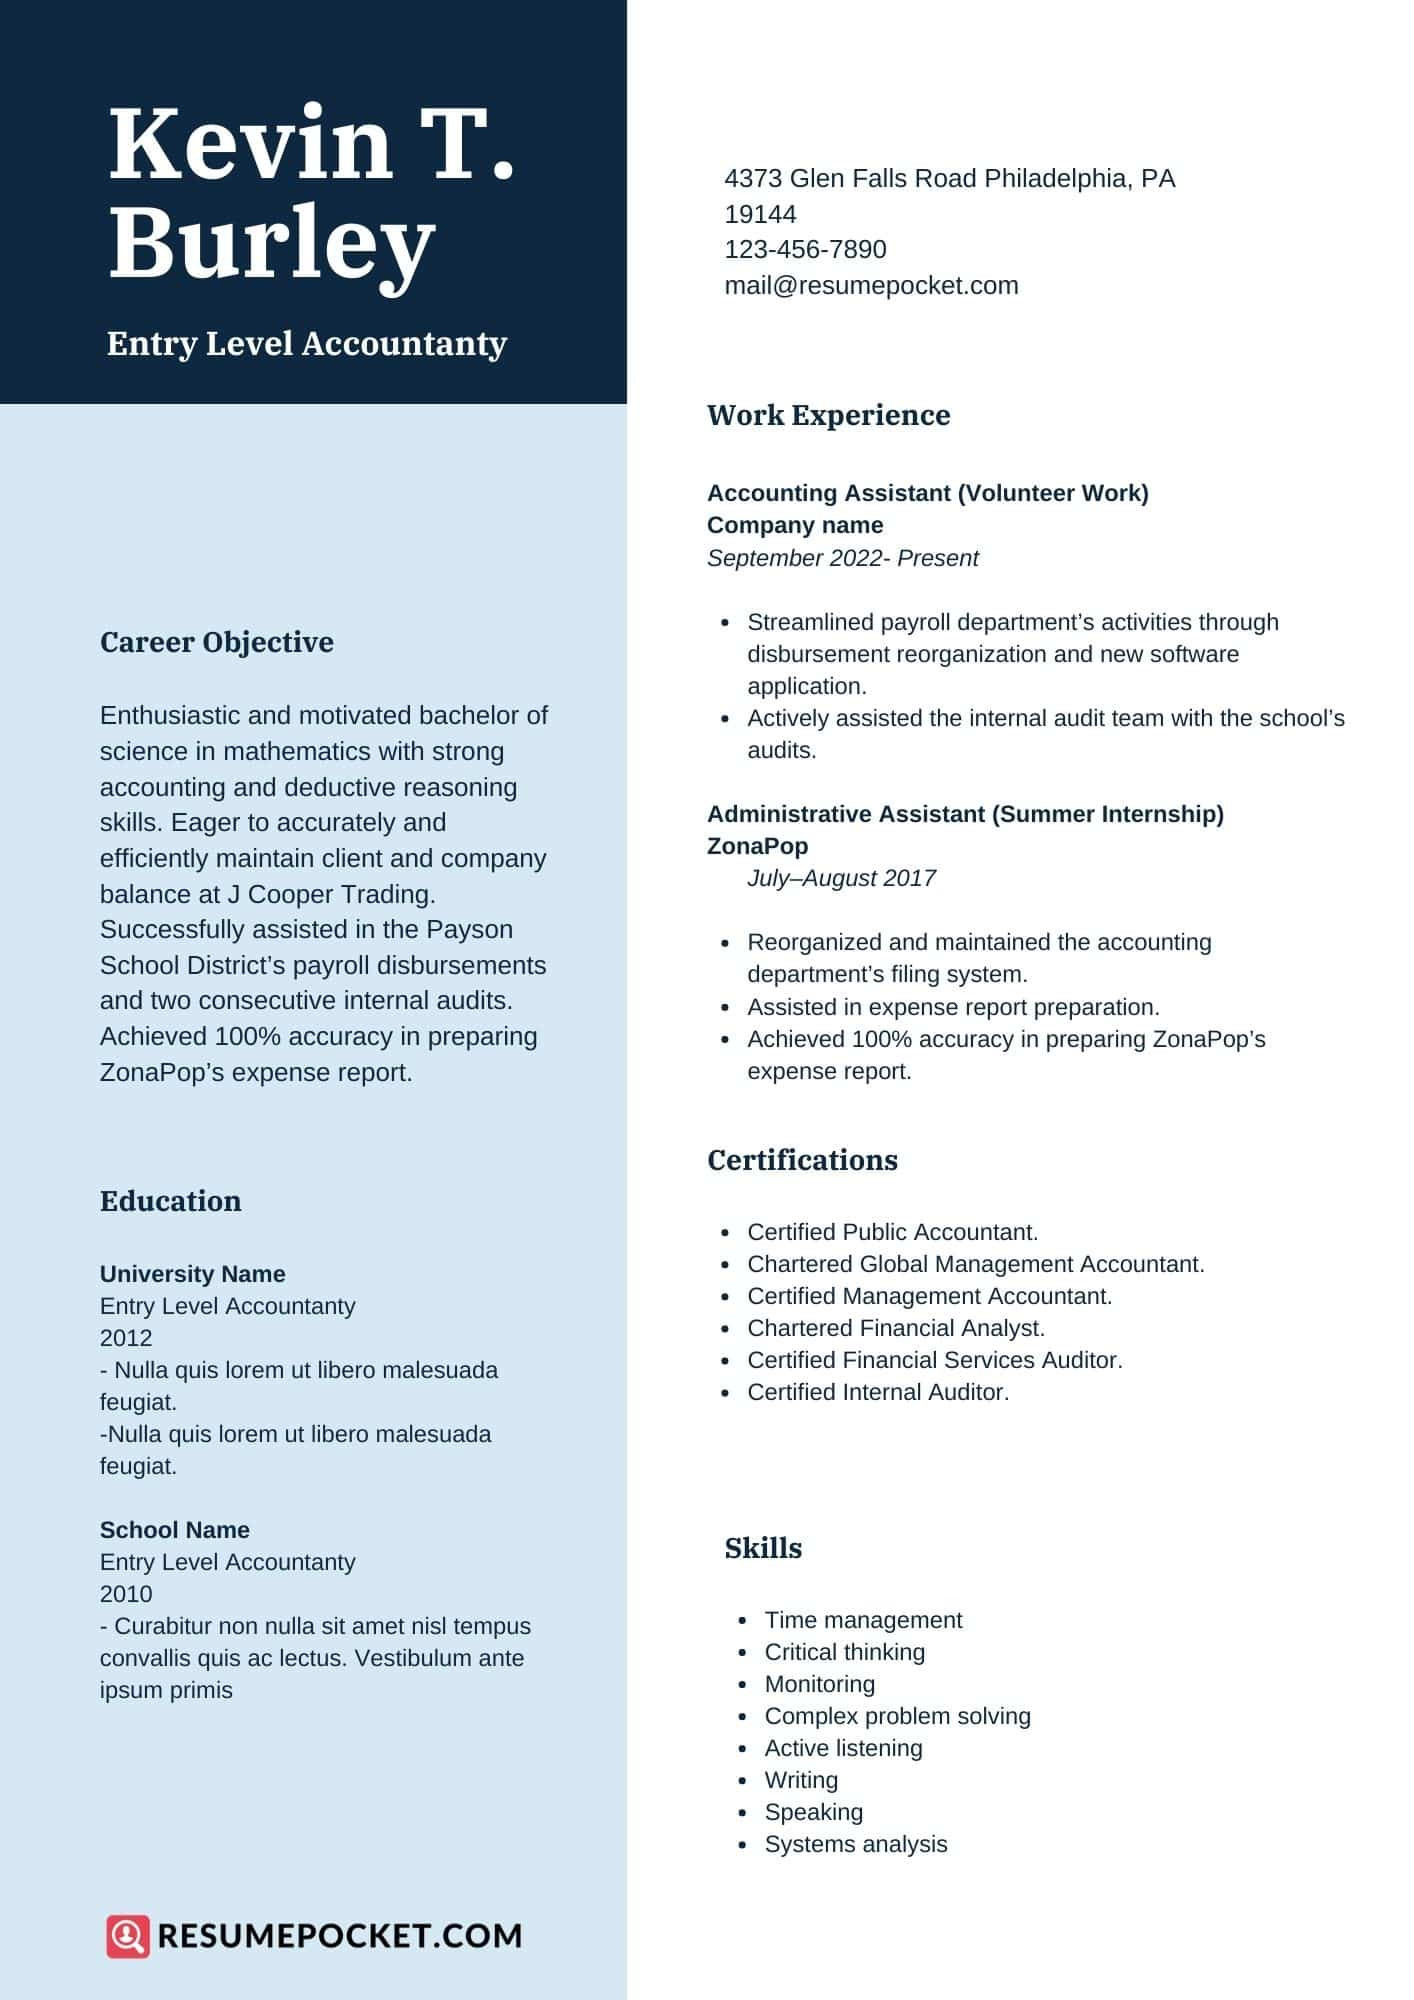 Free Sample Resume for Entry Level Accounting and Finance Entry Level Accountant Resume Samples – Resumepocket